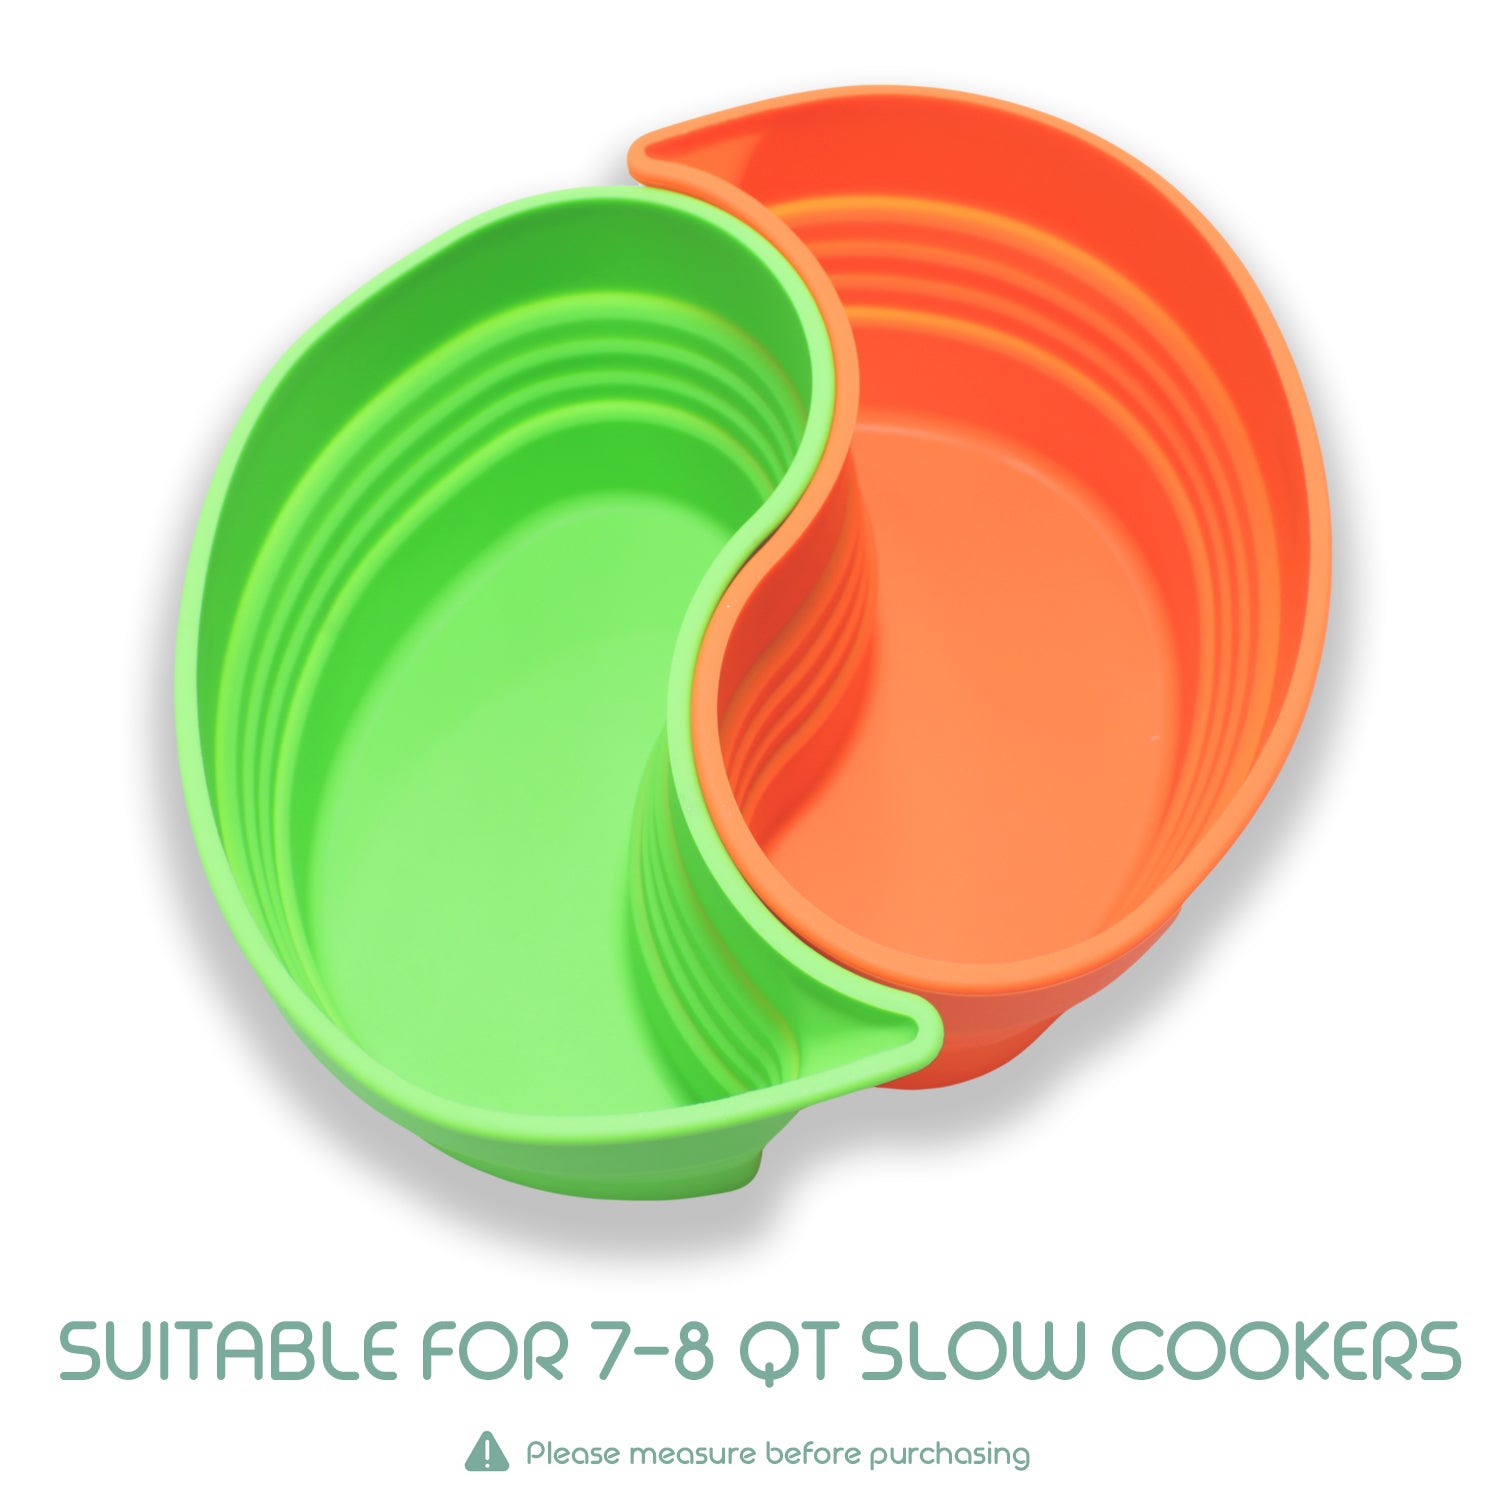 Silicone Vegetable / Food Steamer Basket Insert for Pots, Pans, Crock Pots & More by Sunsella